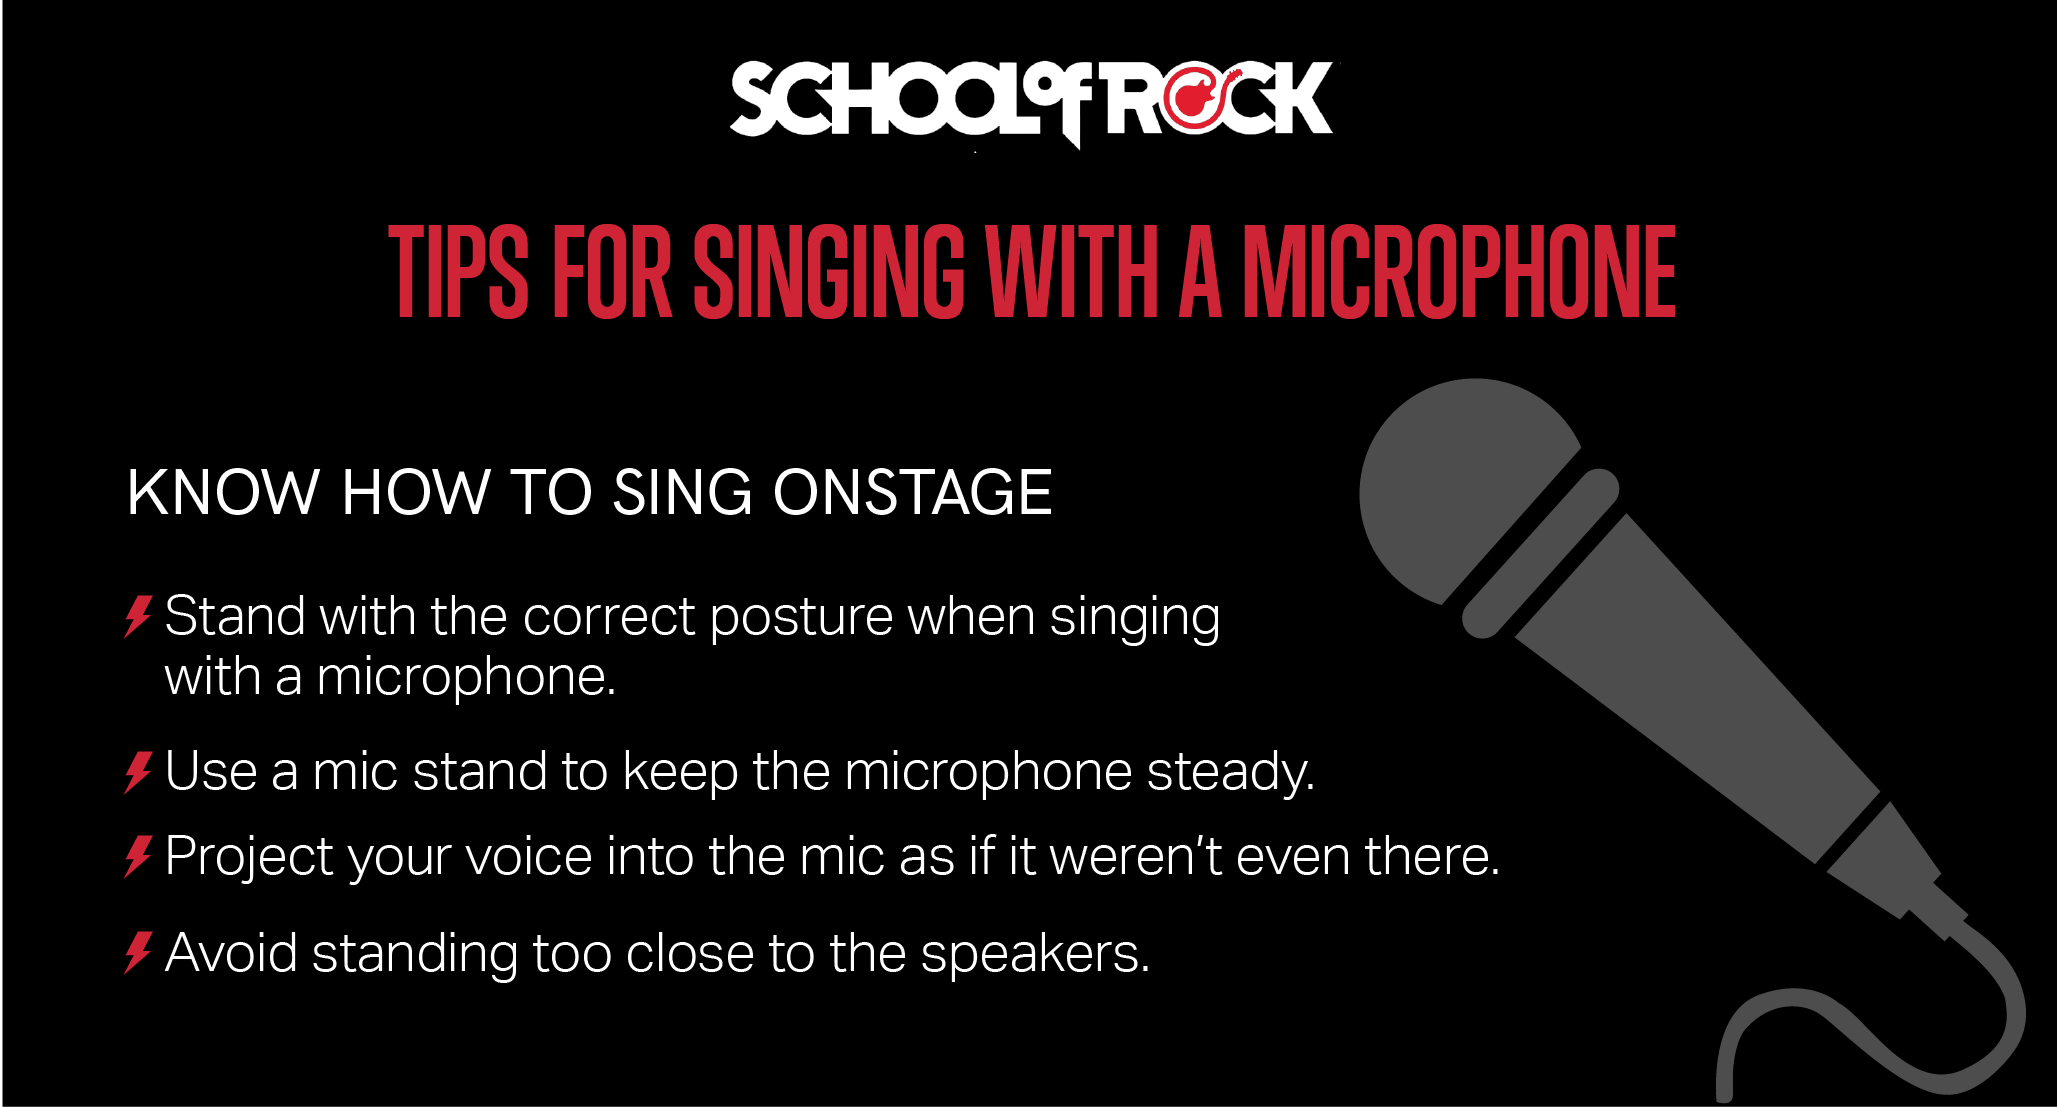 How to sing onstage